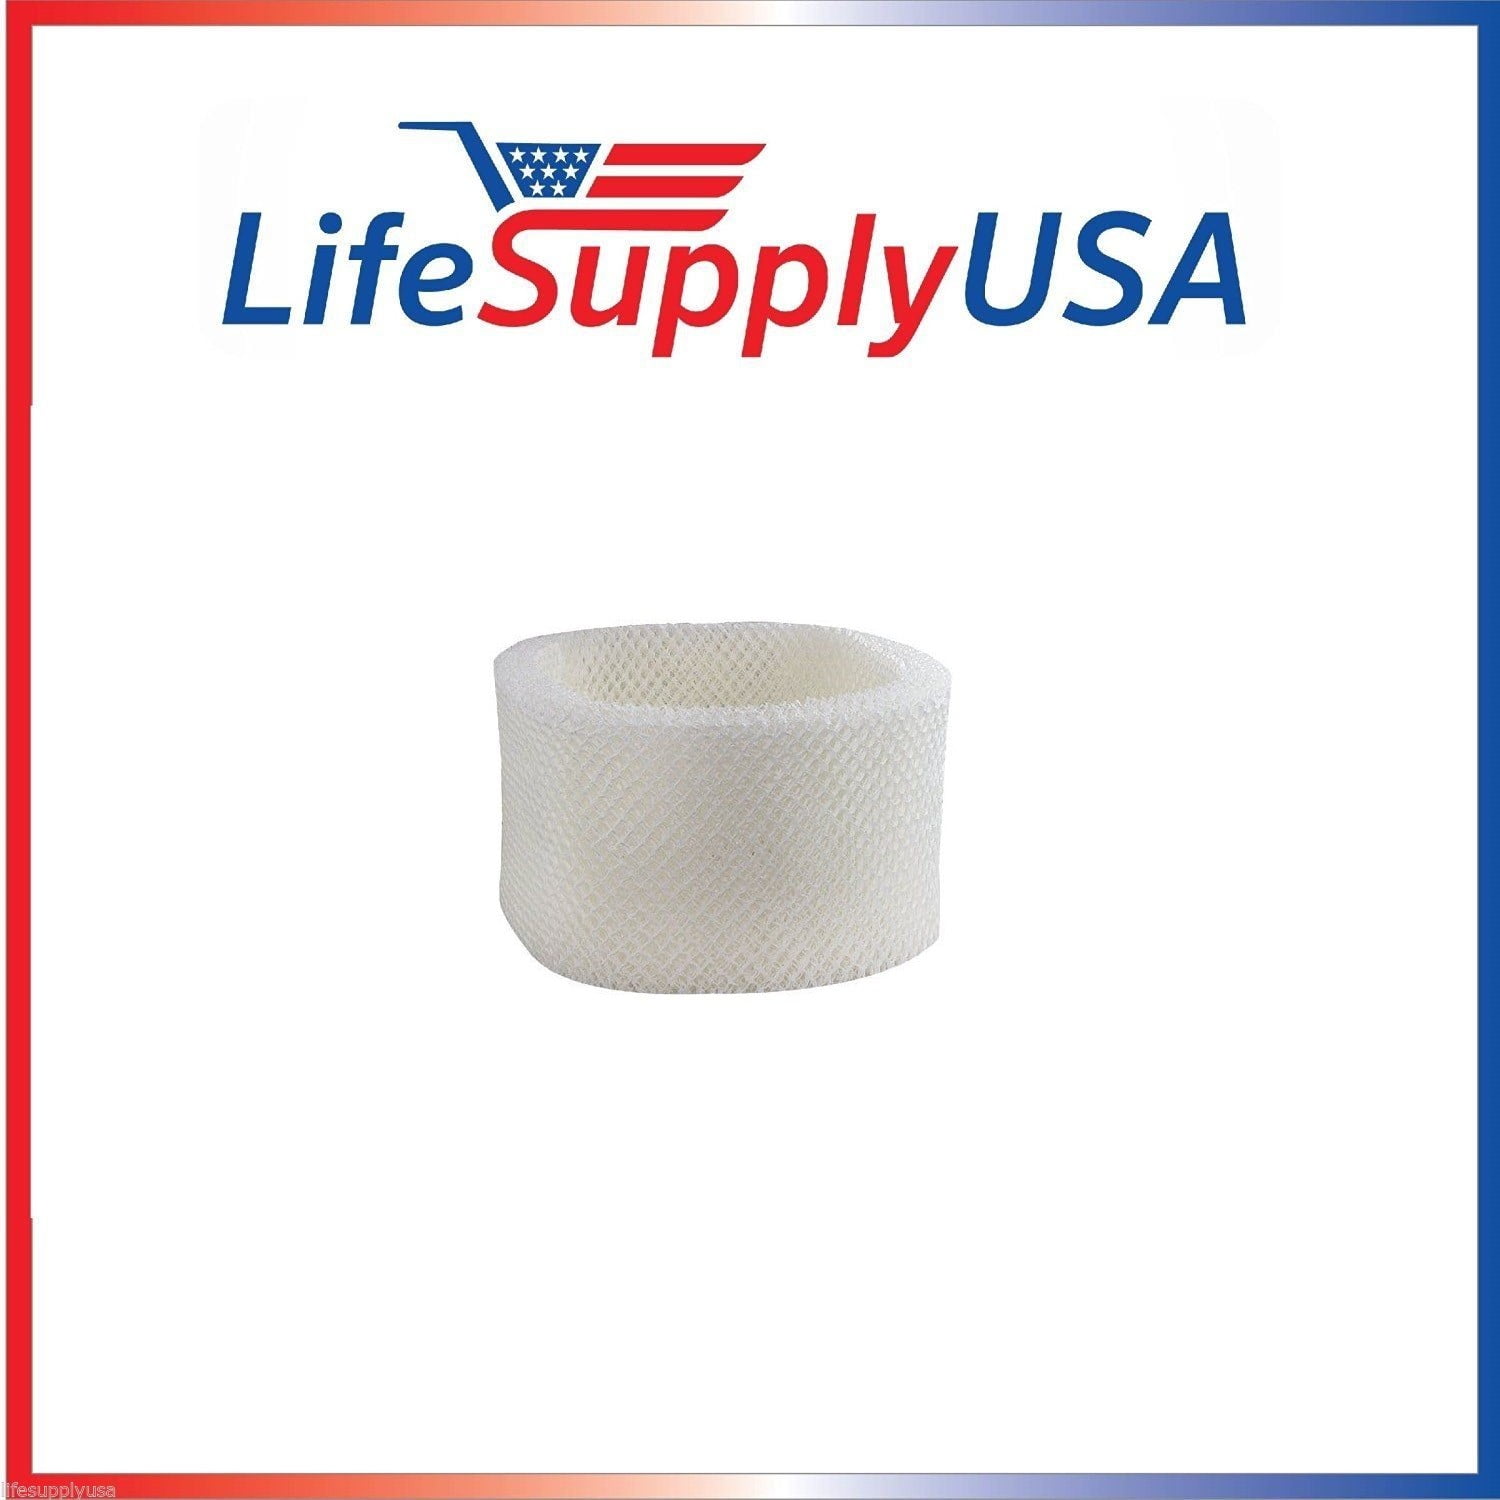 Replacement Air Filter for Bionaire 911D C22 C33 W2S Holmes W6 by LifeSupplyUSA 